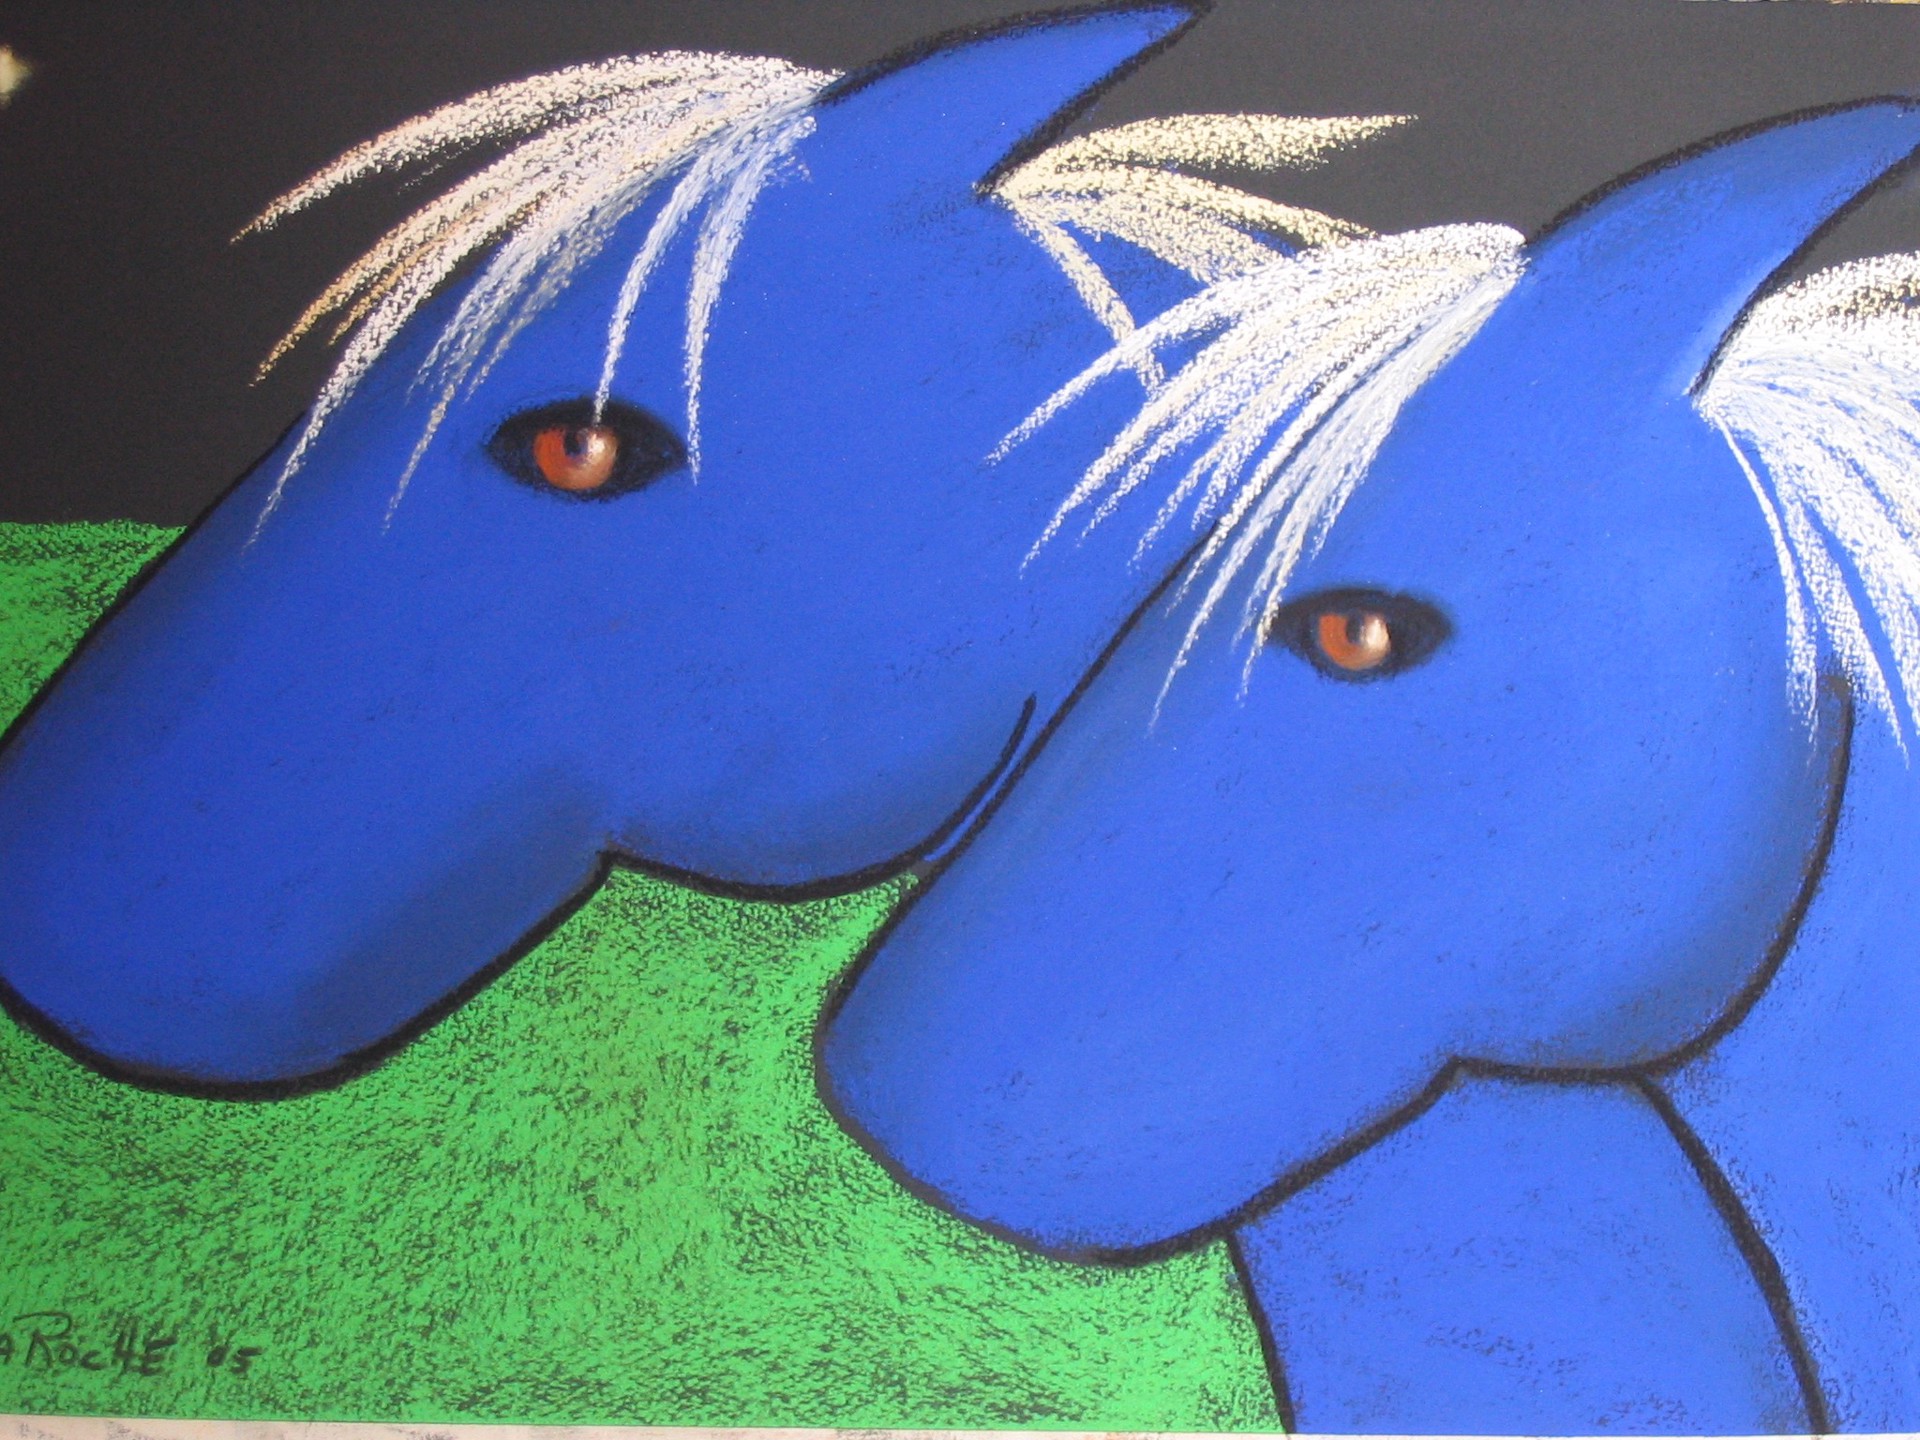 Two Blue Ponies - SOLD available for commission by Carole LaRoche